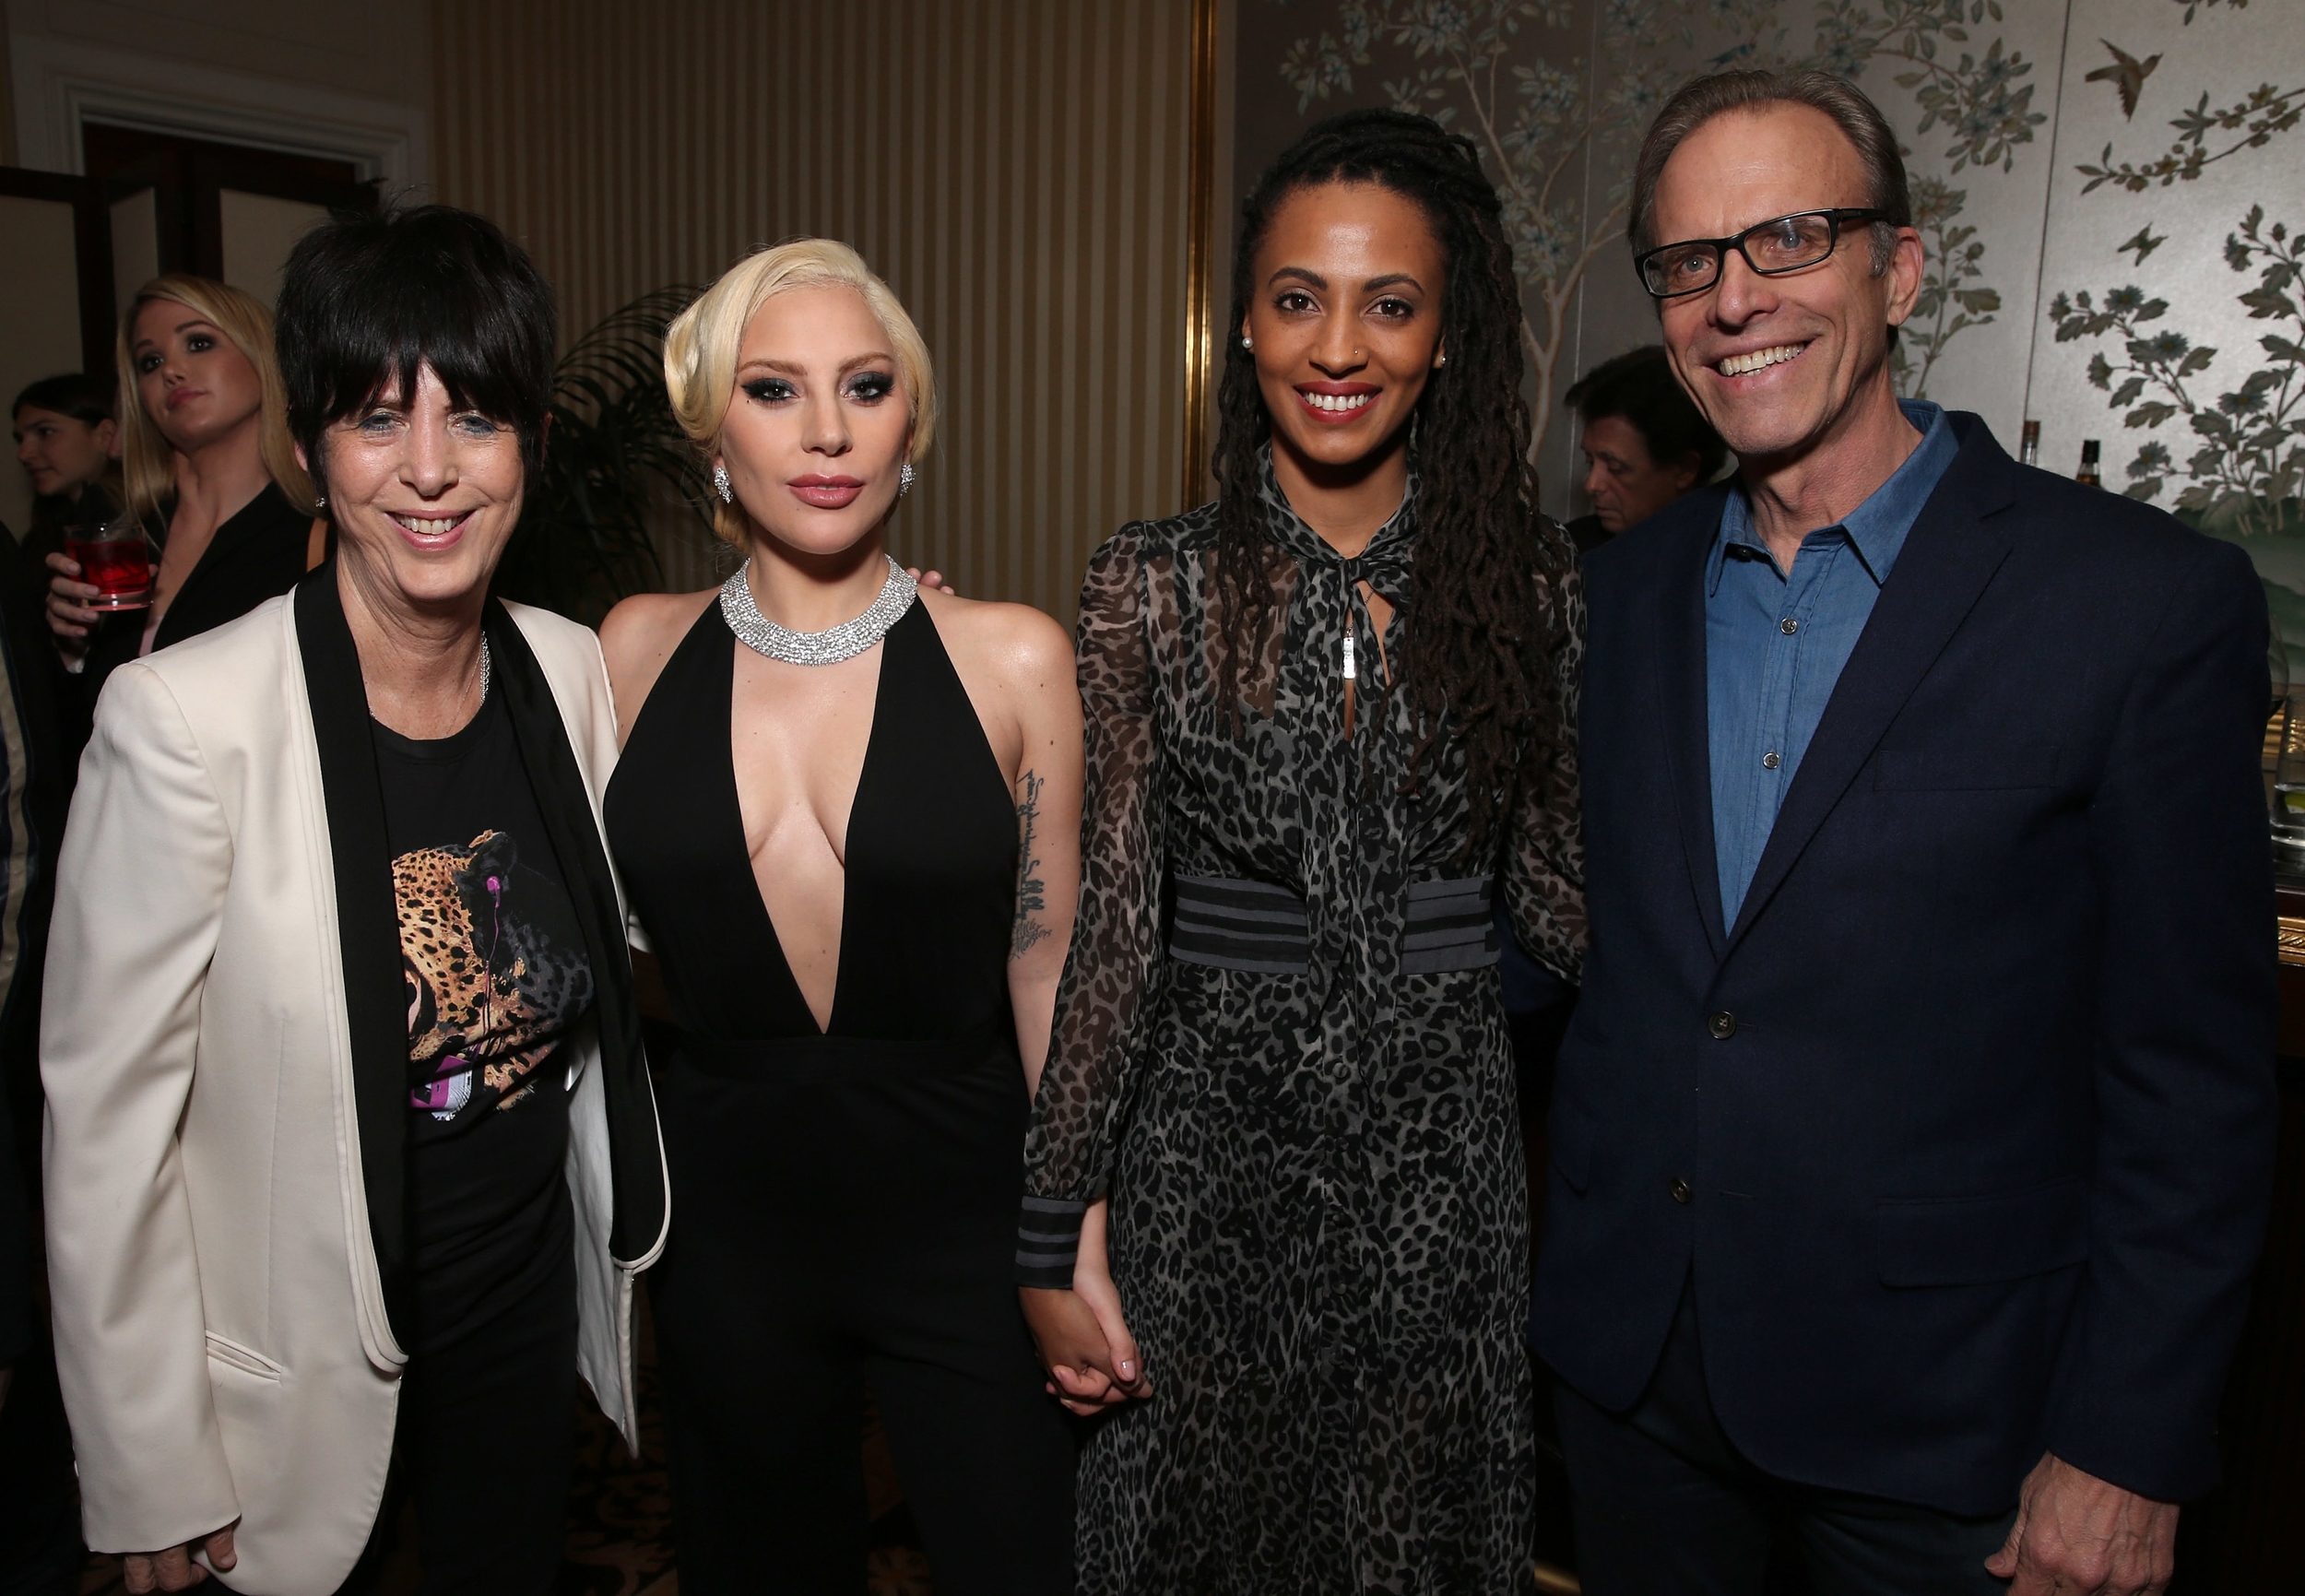  Kamilah Willingham with Diane Warren, Lady Gaga, and  The Hunting Ground &nbsp;director Kirby Dick following a special performance of "Til It Happens to You" 